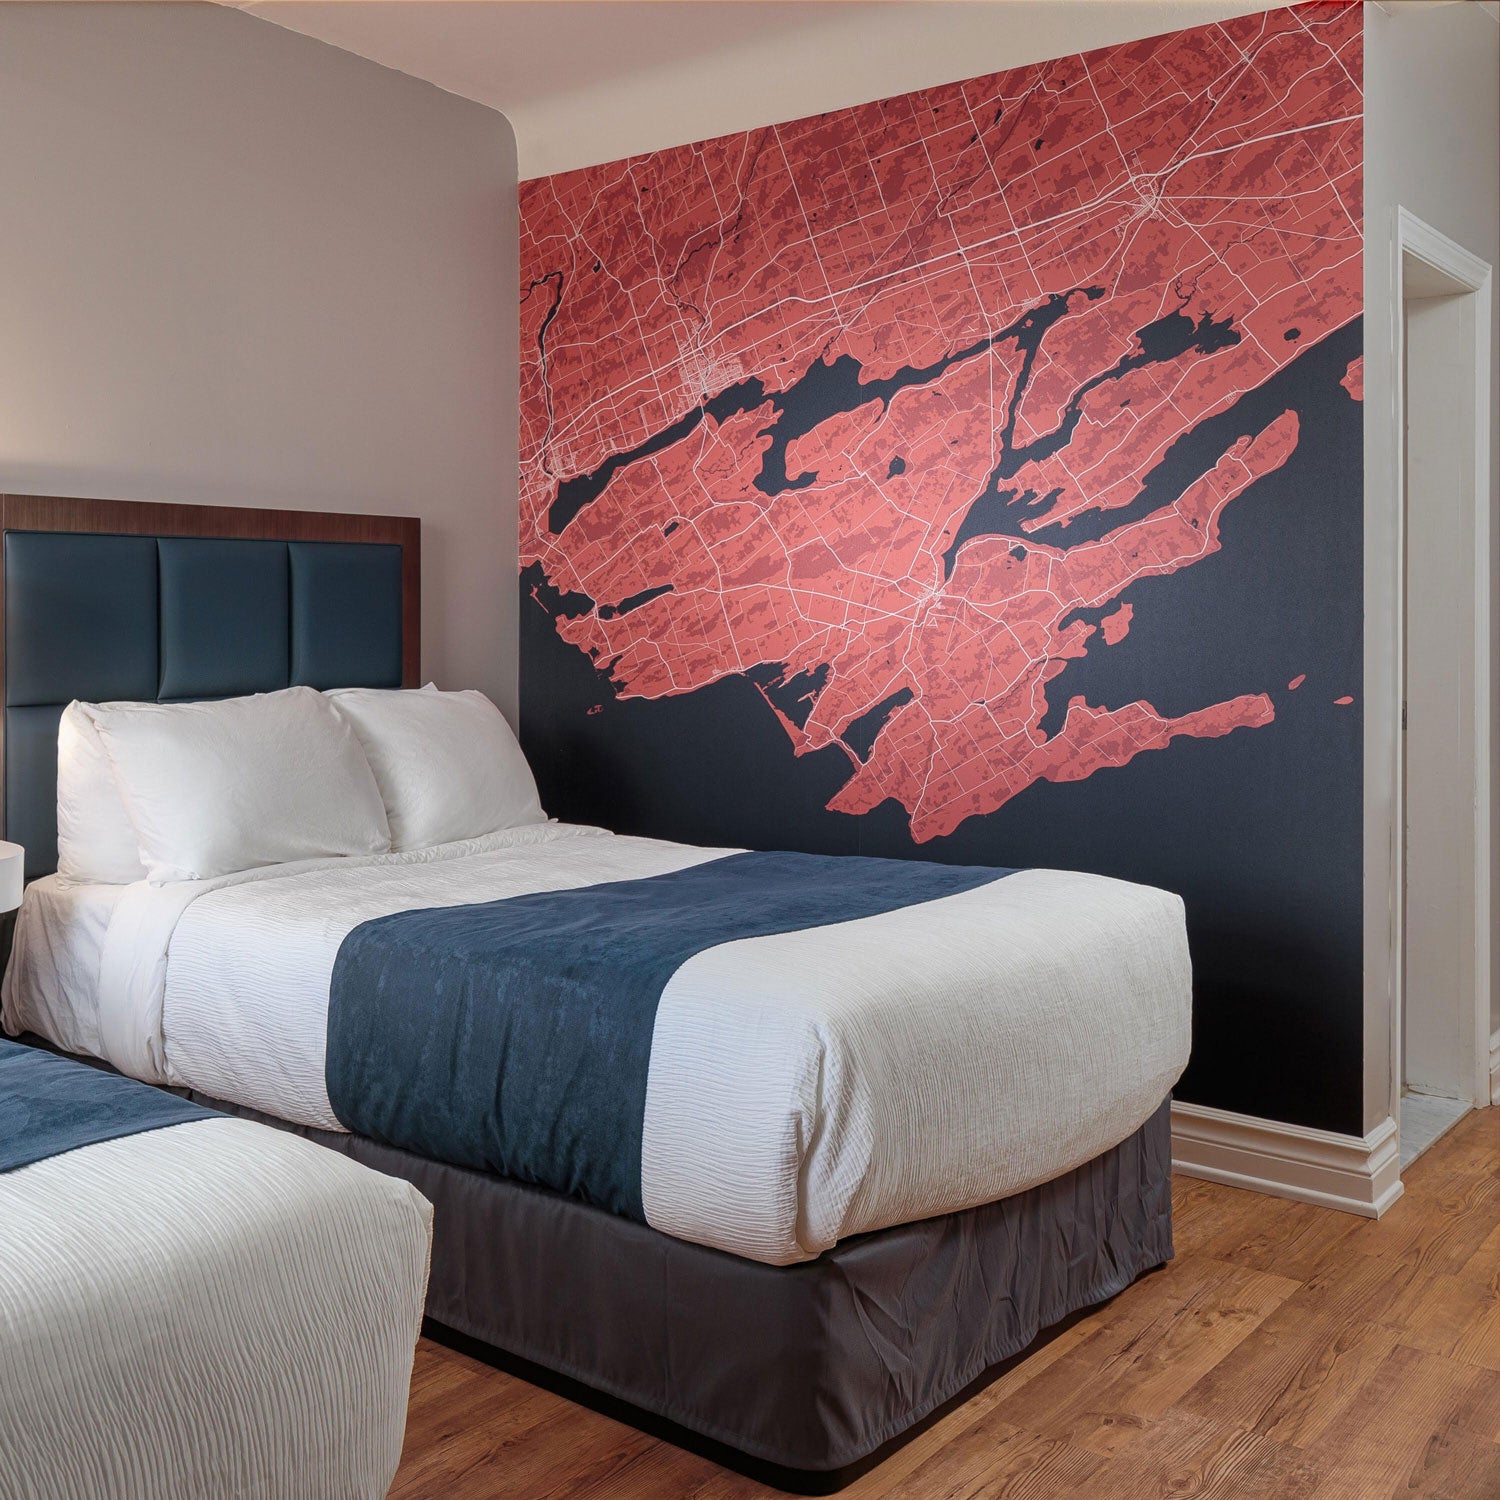 Personalizing Hotel Room Decor with Informative Custom City Map Prints and Wall Murals